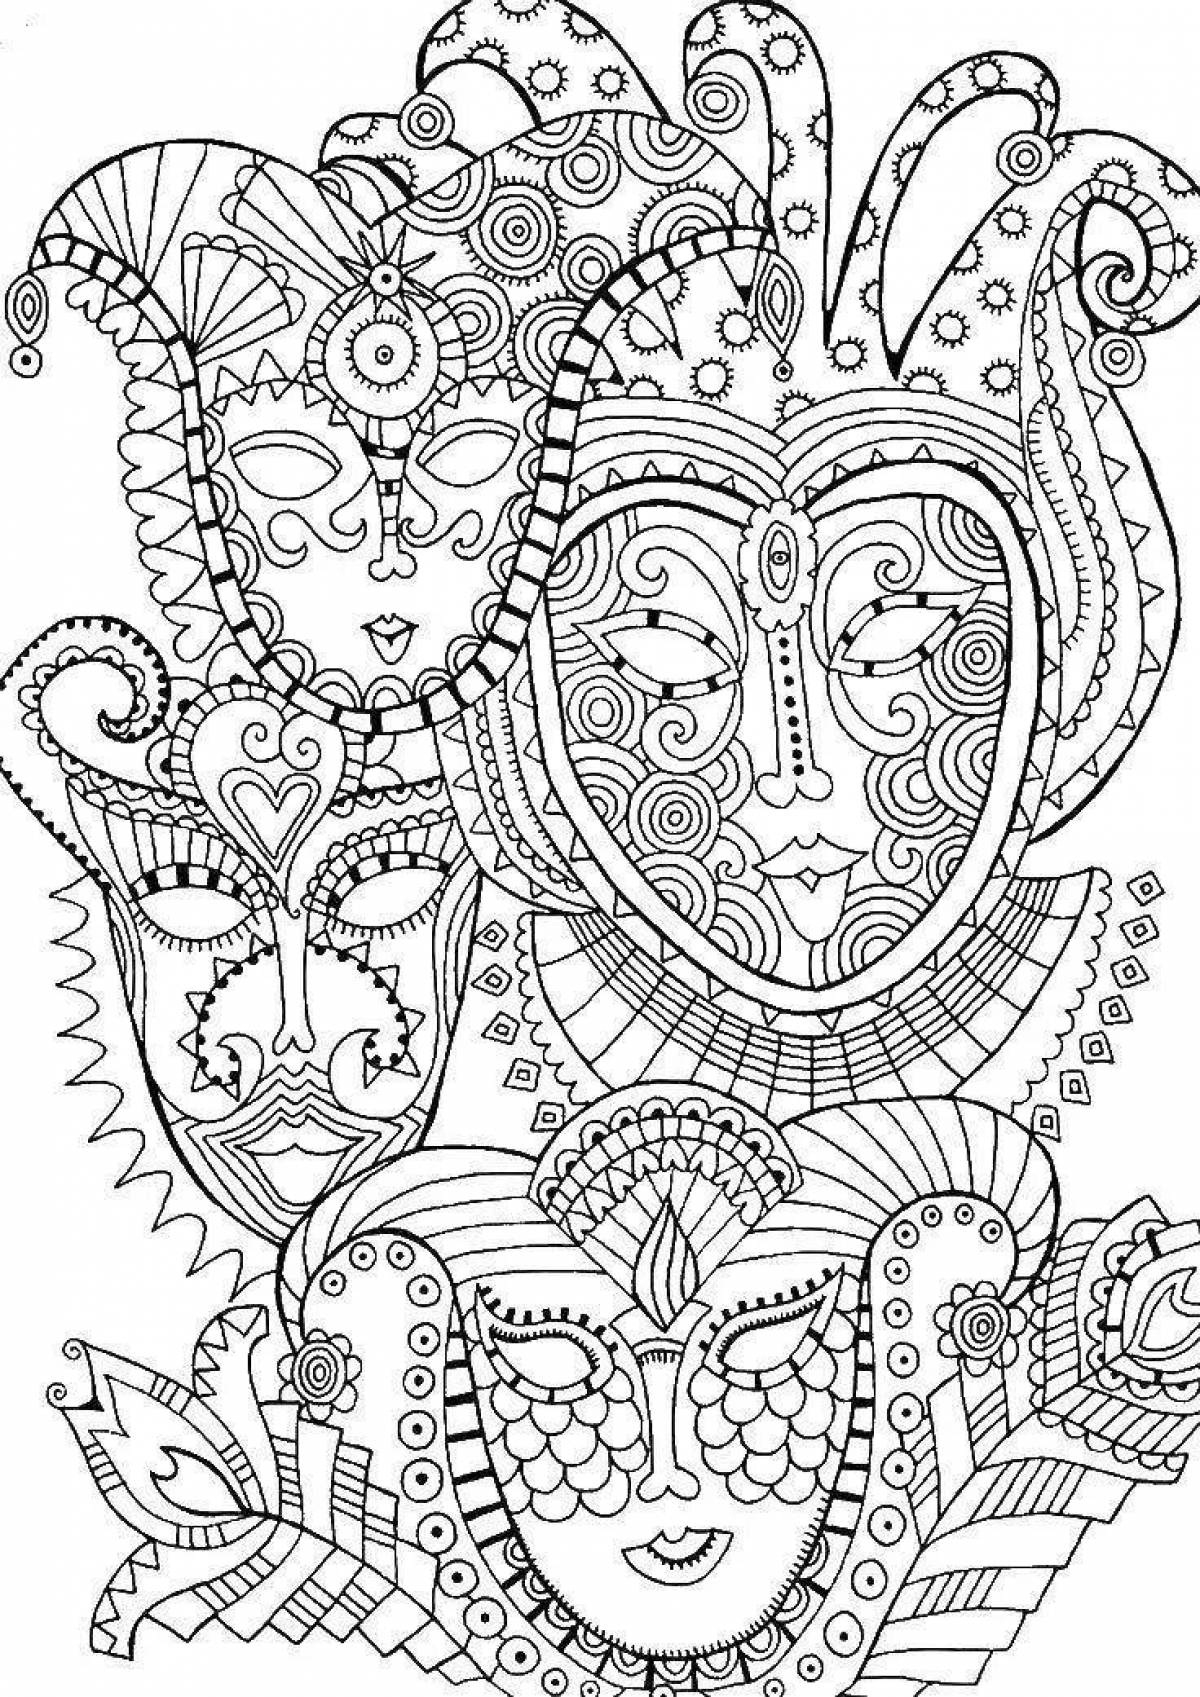 Coloring page with intricate patterns - luxury